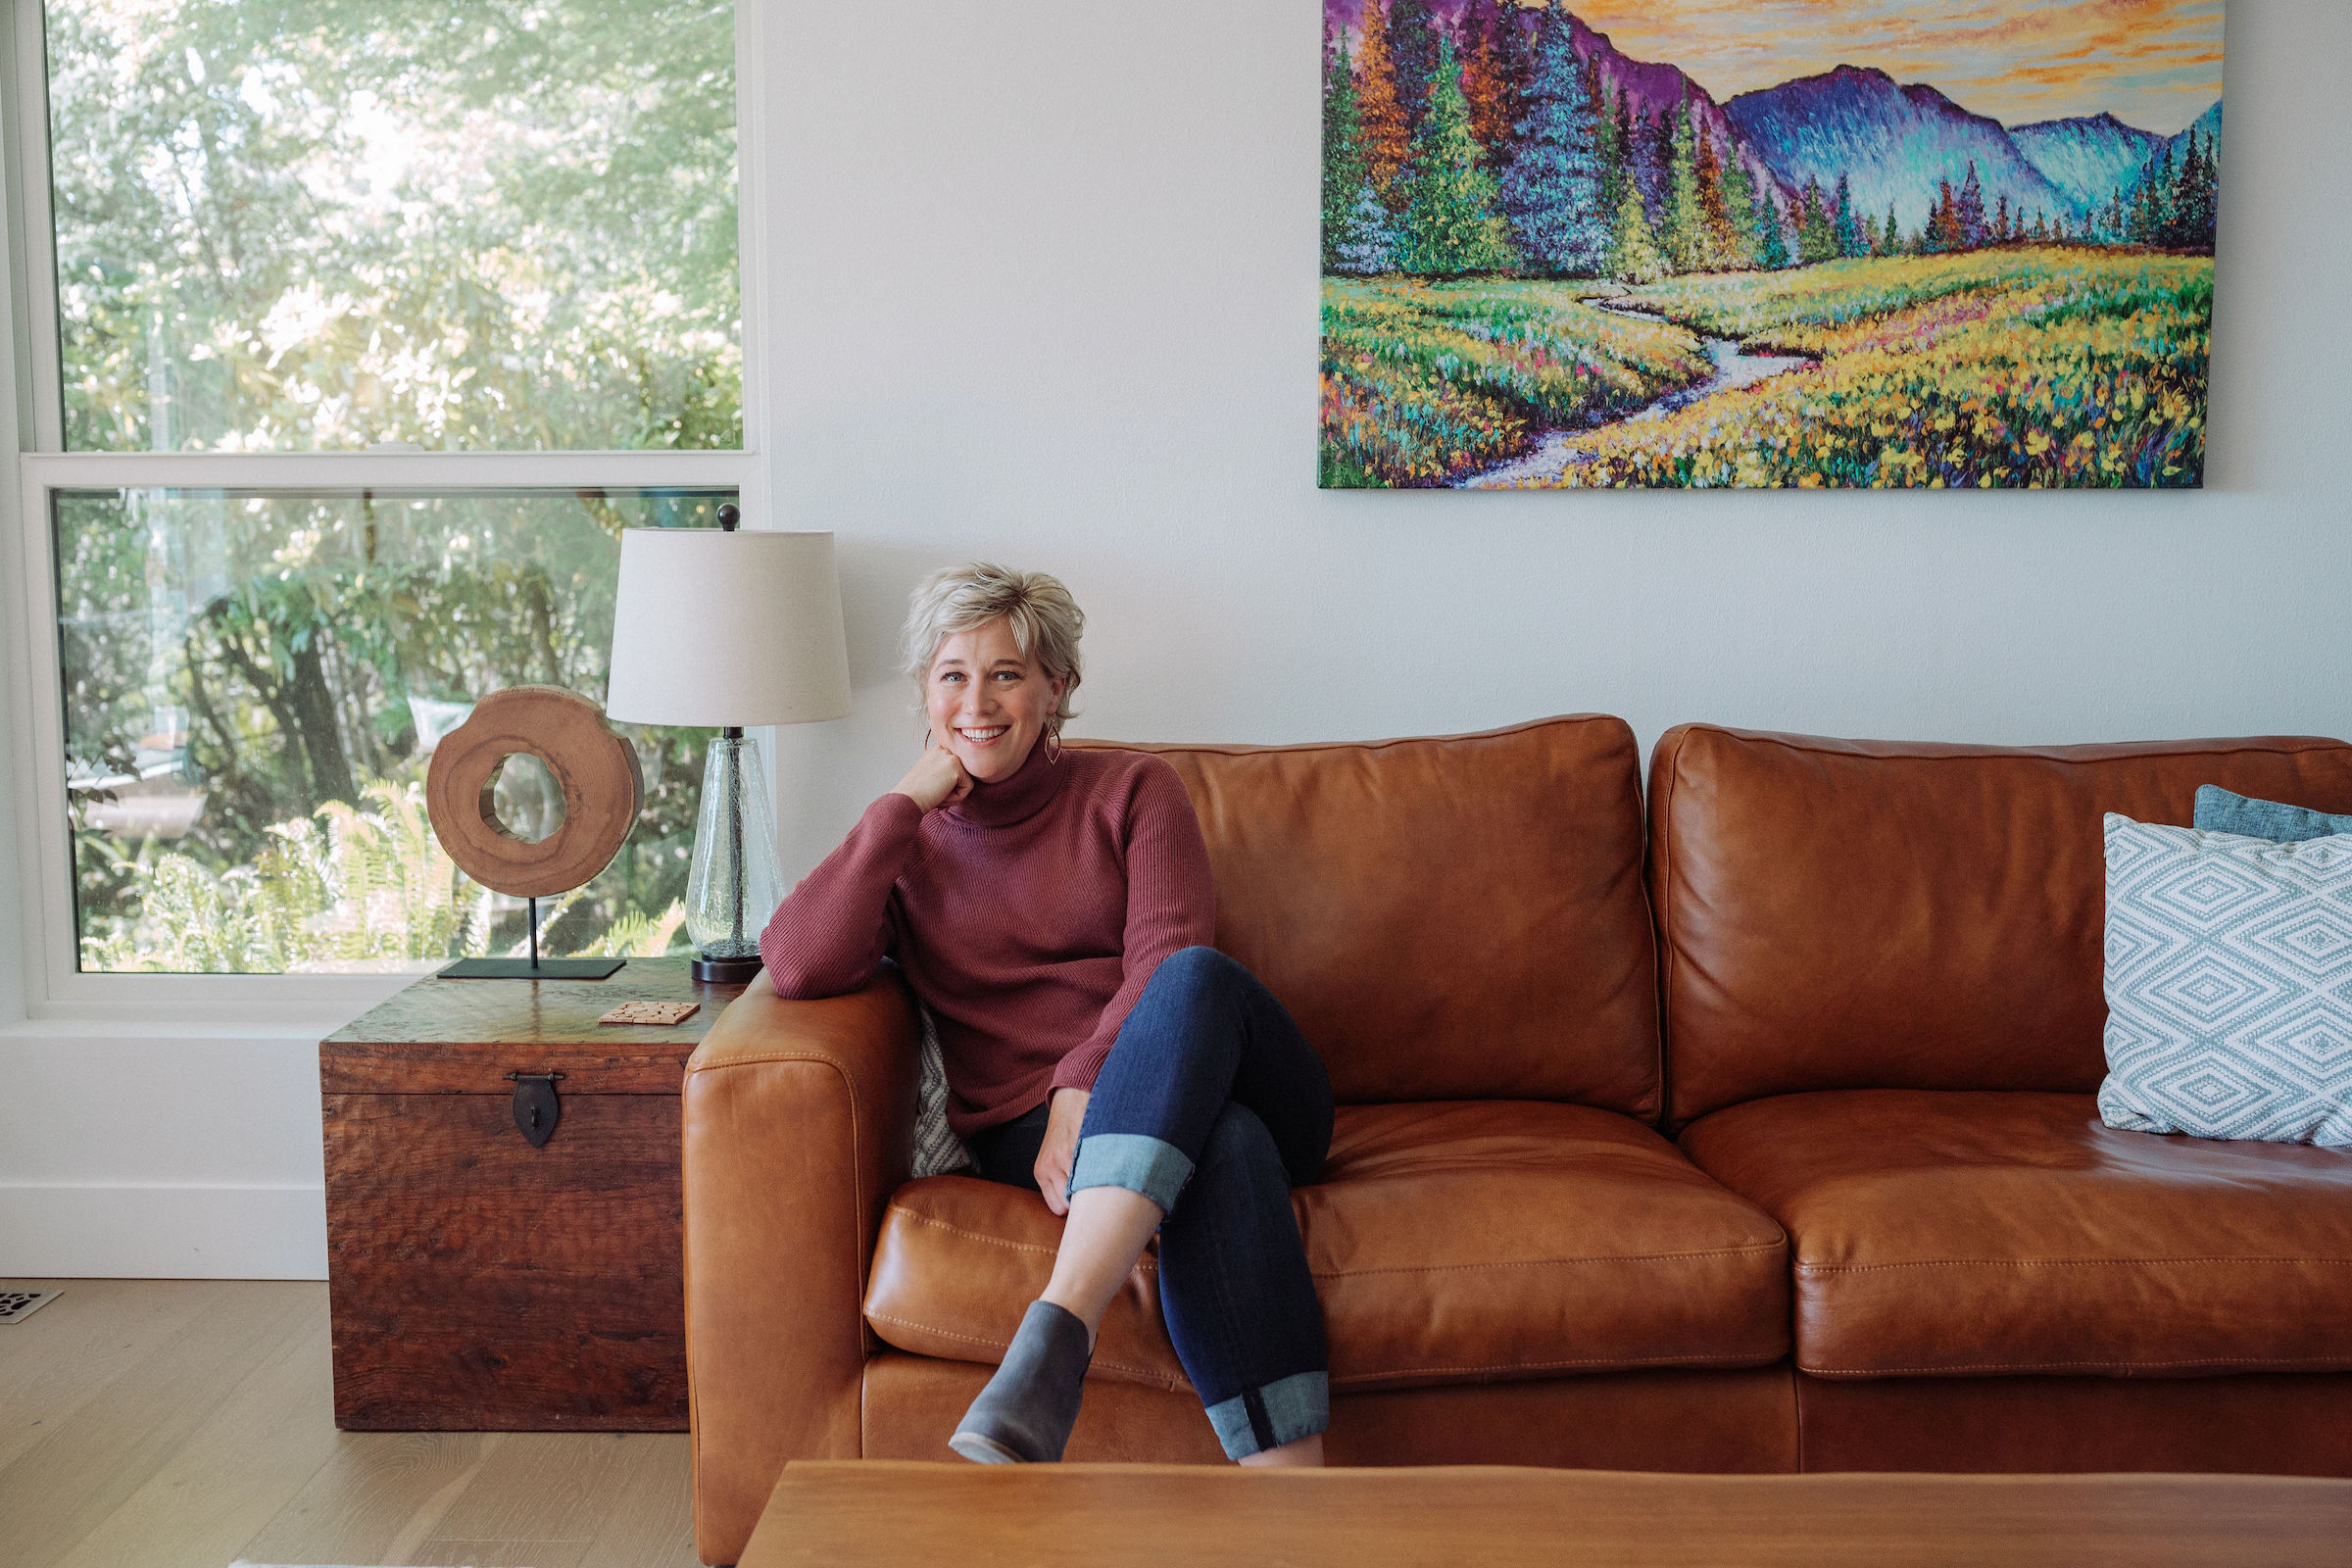 motivational business speaker Megan Gluth-Bohan sits on a leather couch